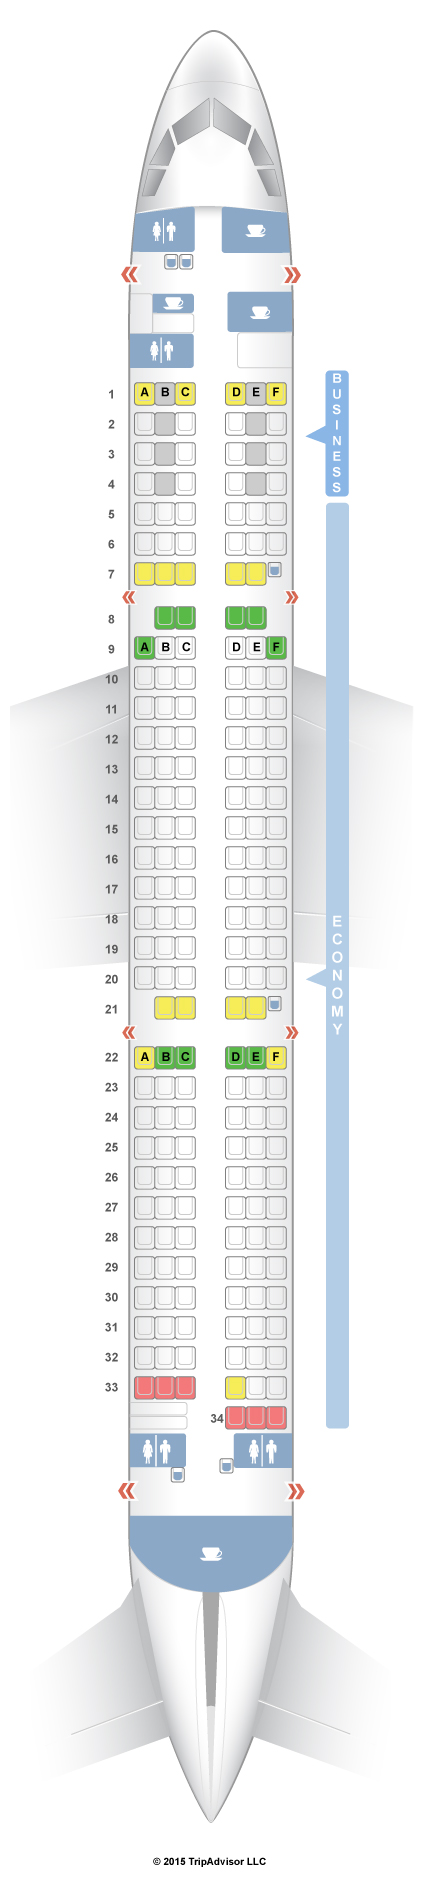 Delta 752 Seating Chart